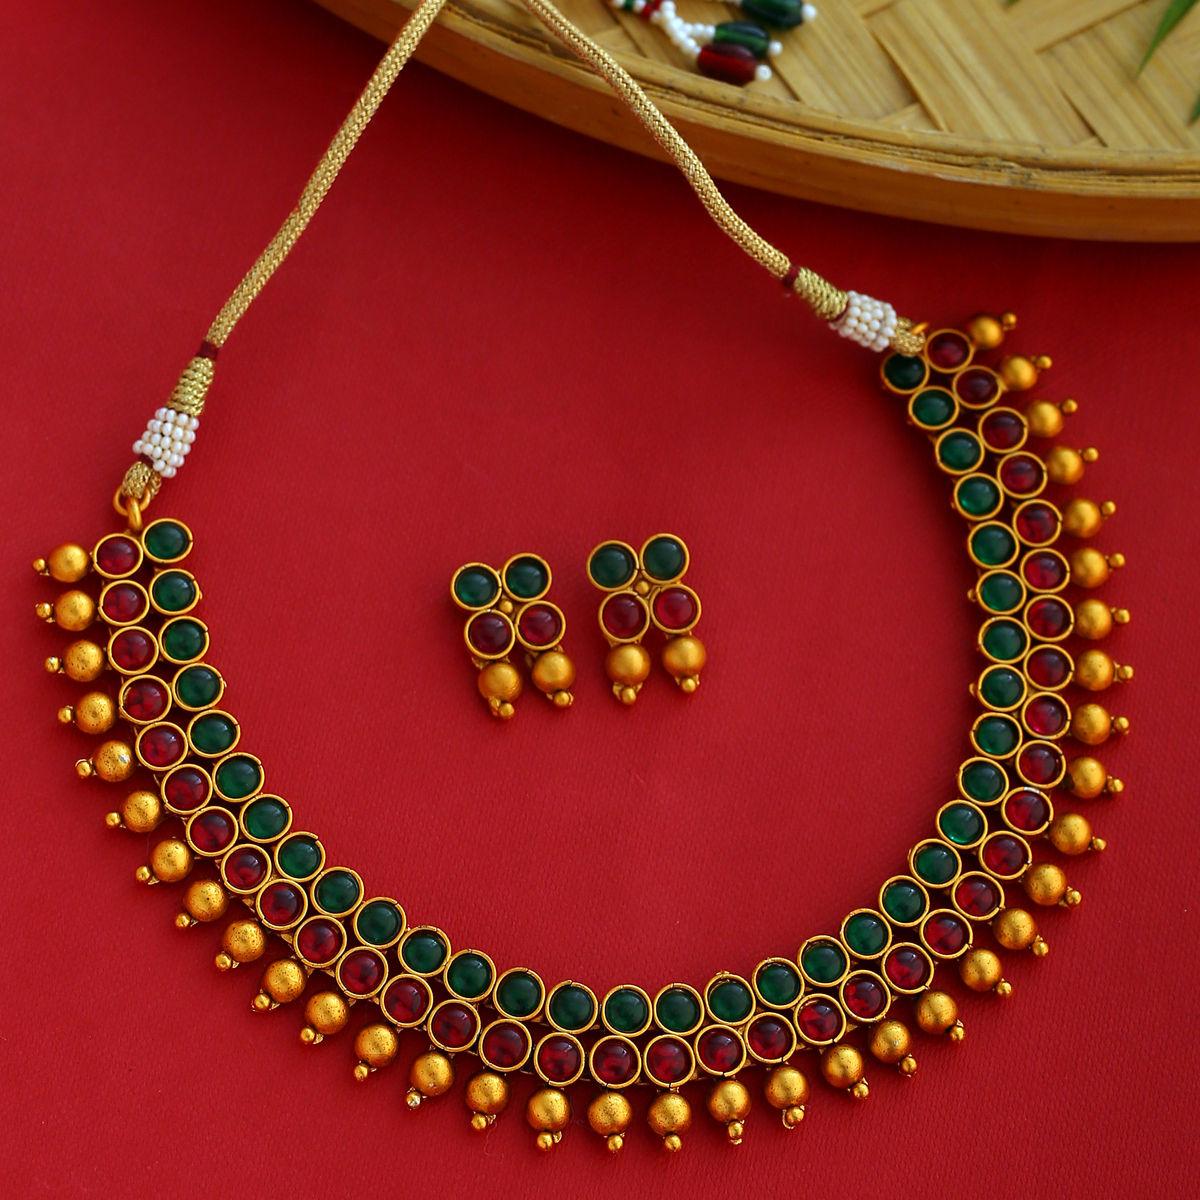 Buy Z Green Onyx Gemstones Facet Necklace - Accessorize India